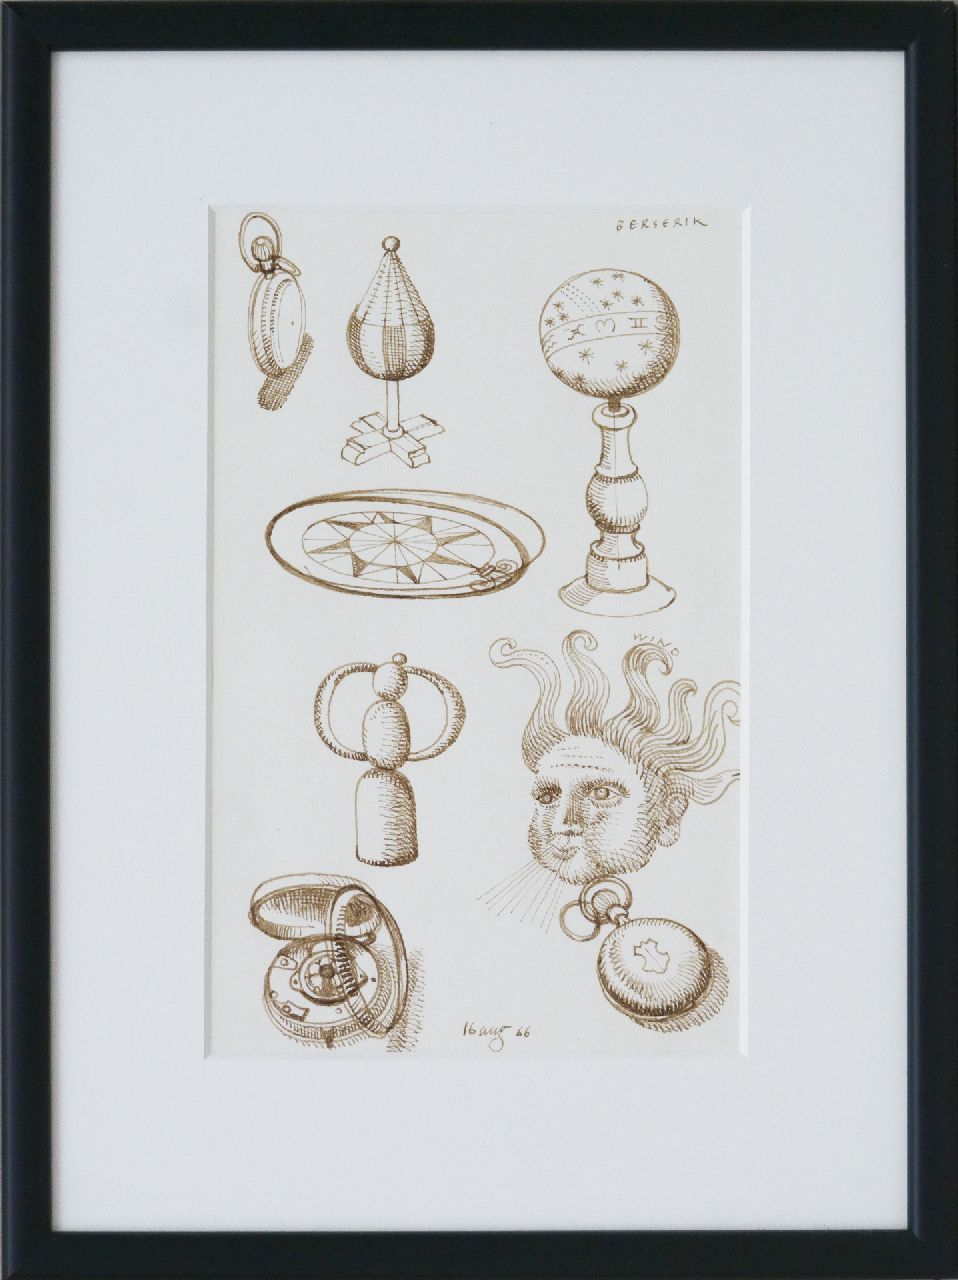 Berserik H.  | Hermanus 'Herman' Berserik | Watercolours and drawings offered for sale | Sundial and watches, pen and ink on paper 23.7 x 15.8 cm, signed u.r. and dated 16 aug 66